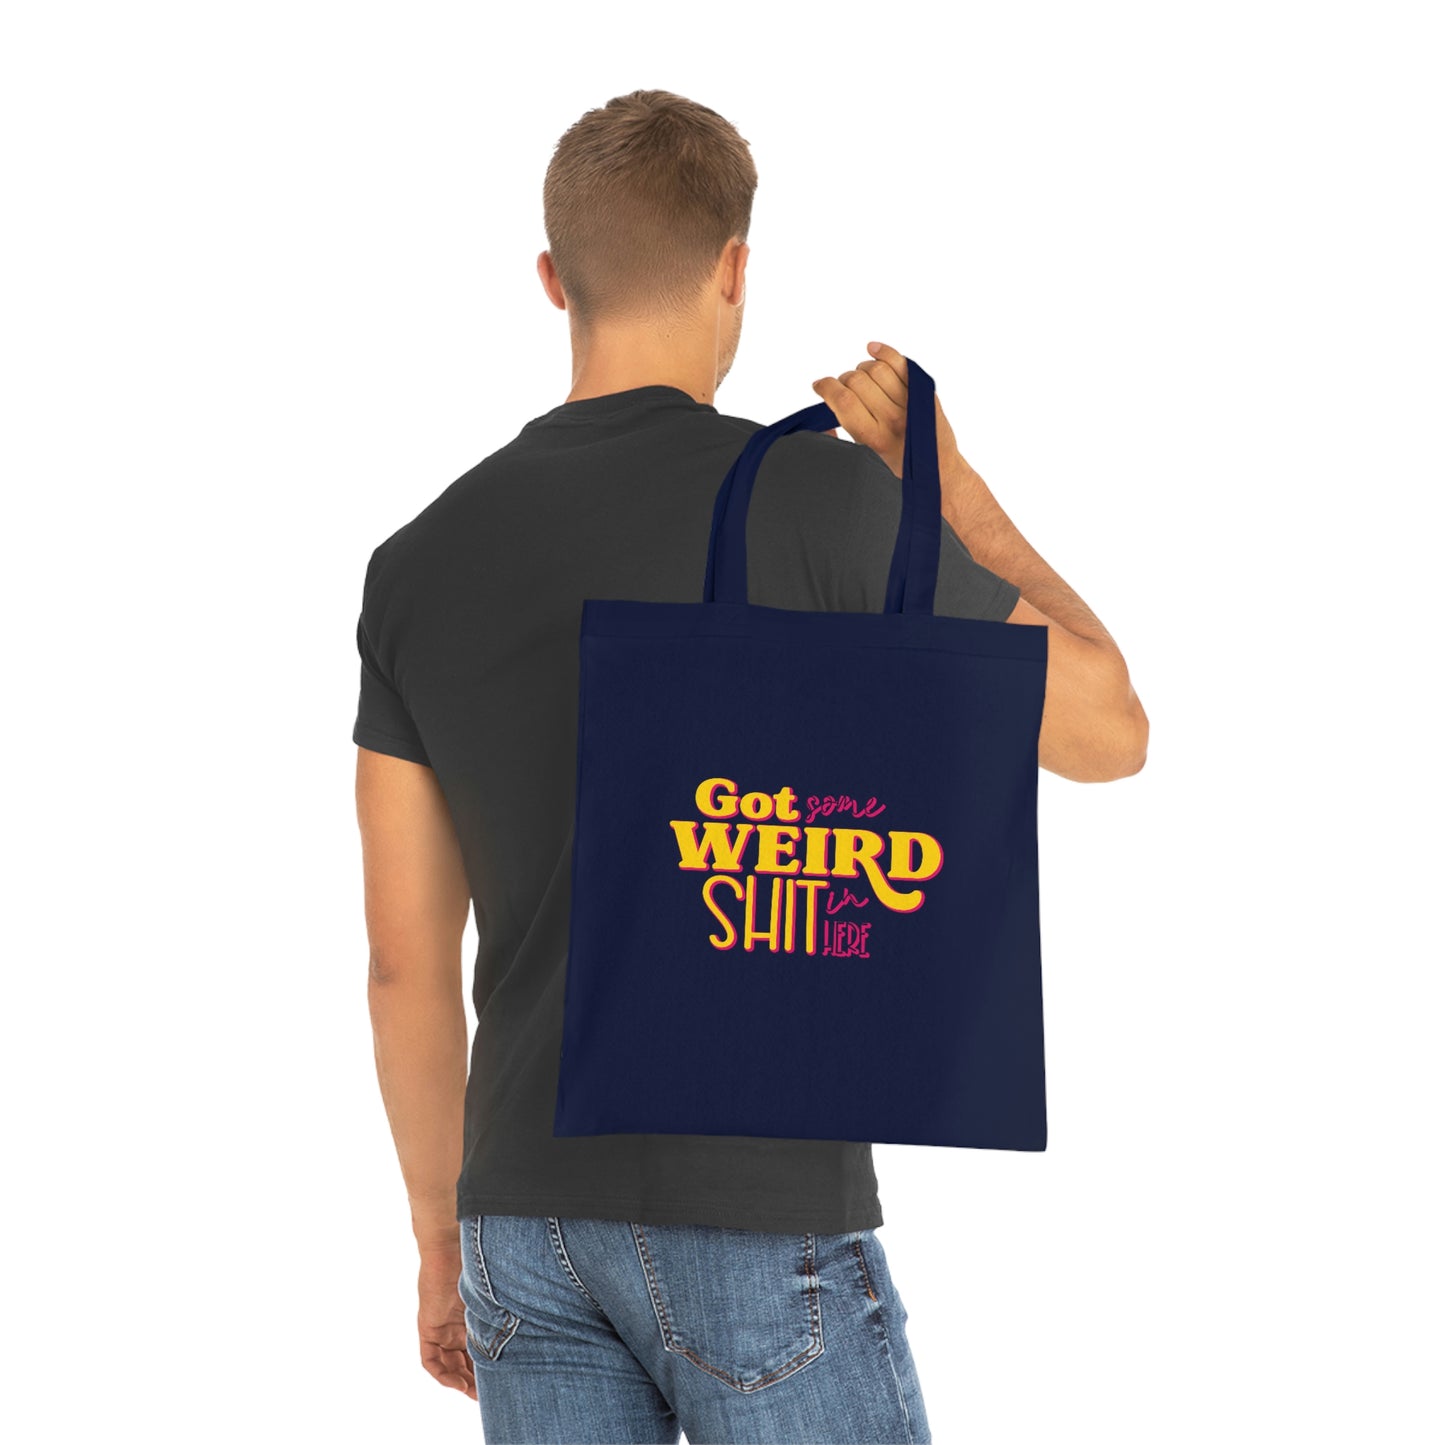 #weirdo | Dark blue shopping bag for weird people! Check out this funny meme: Got some weird shit in here. What kind of weird stuff are you hiding in your 100% cotton shopping bag?